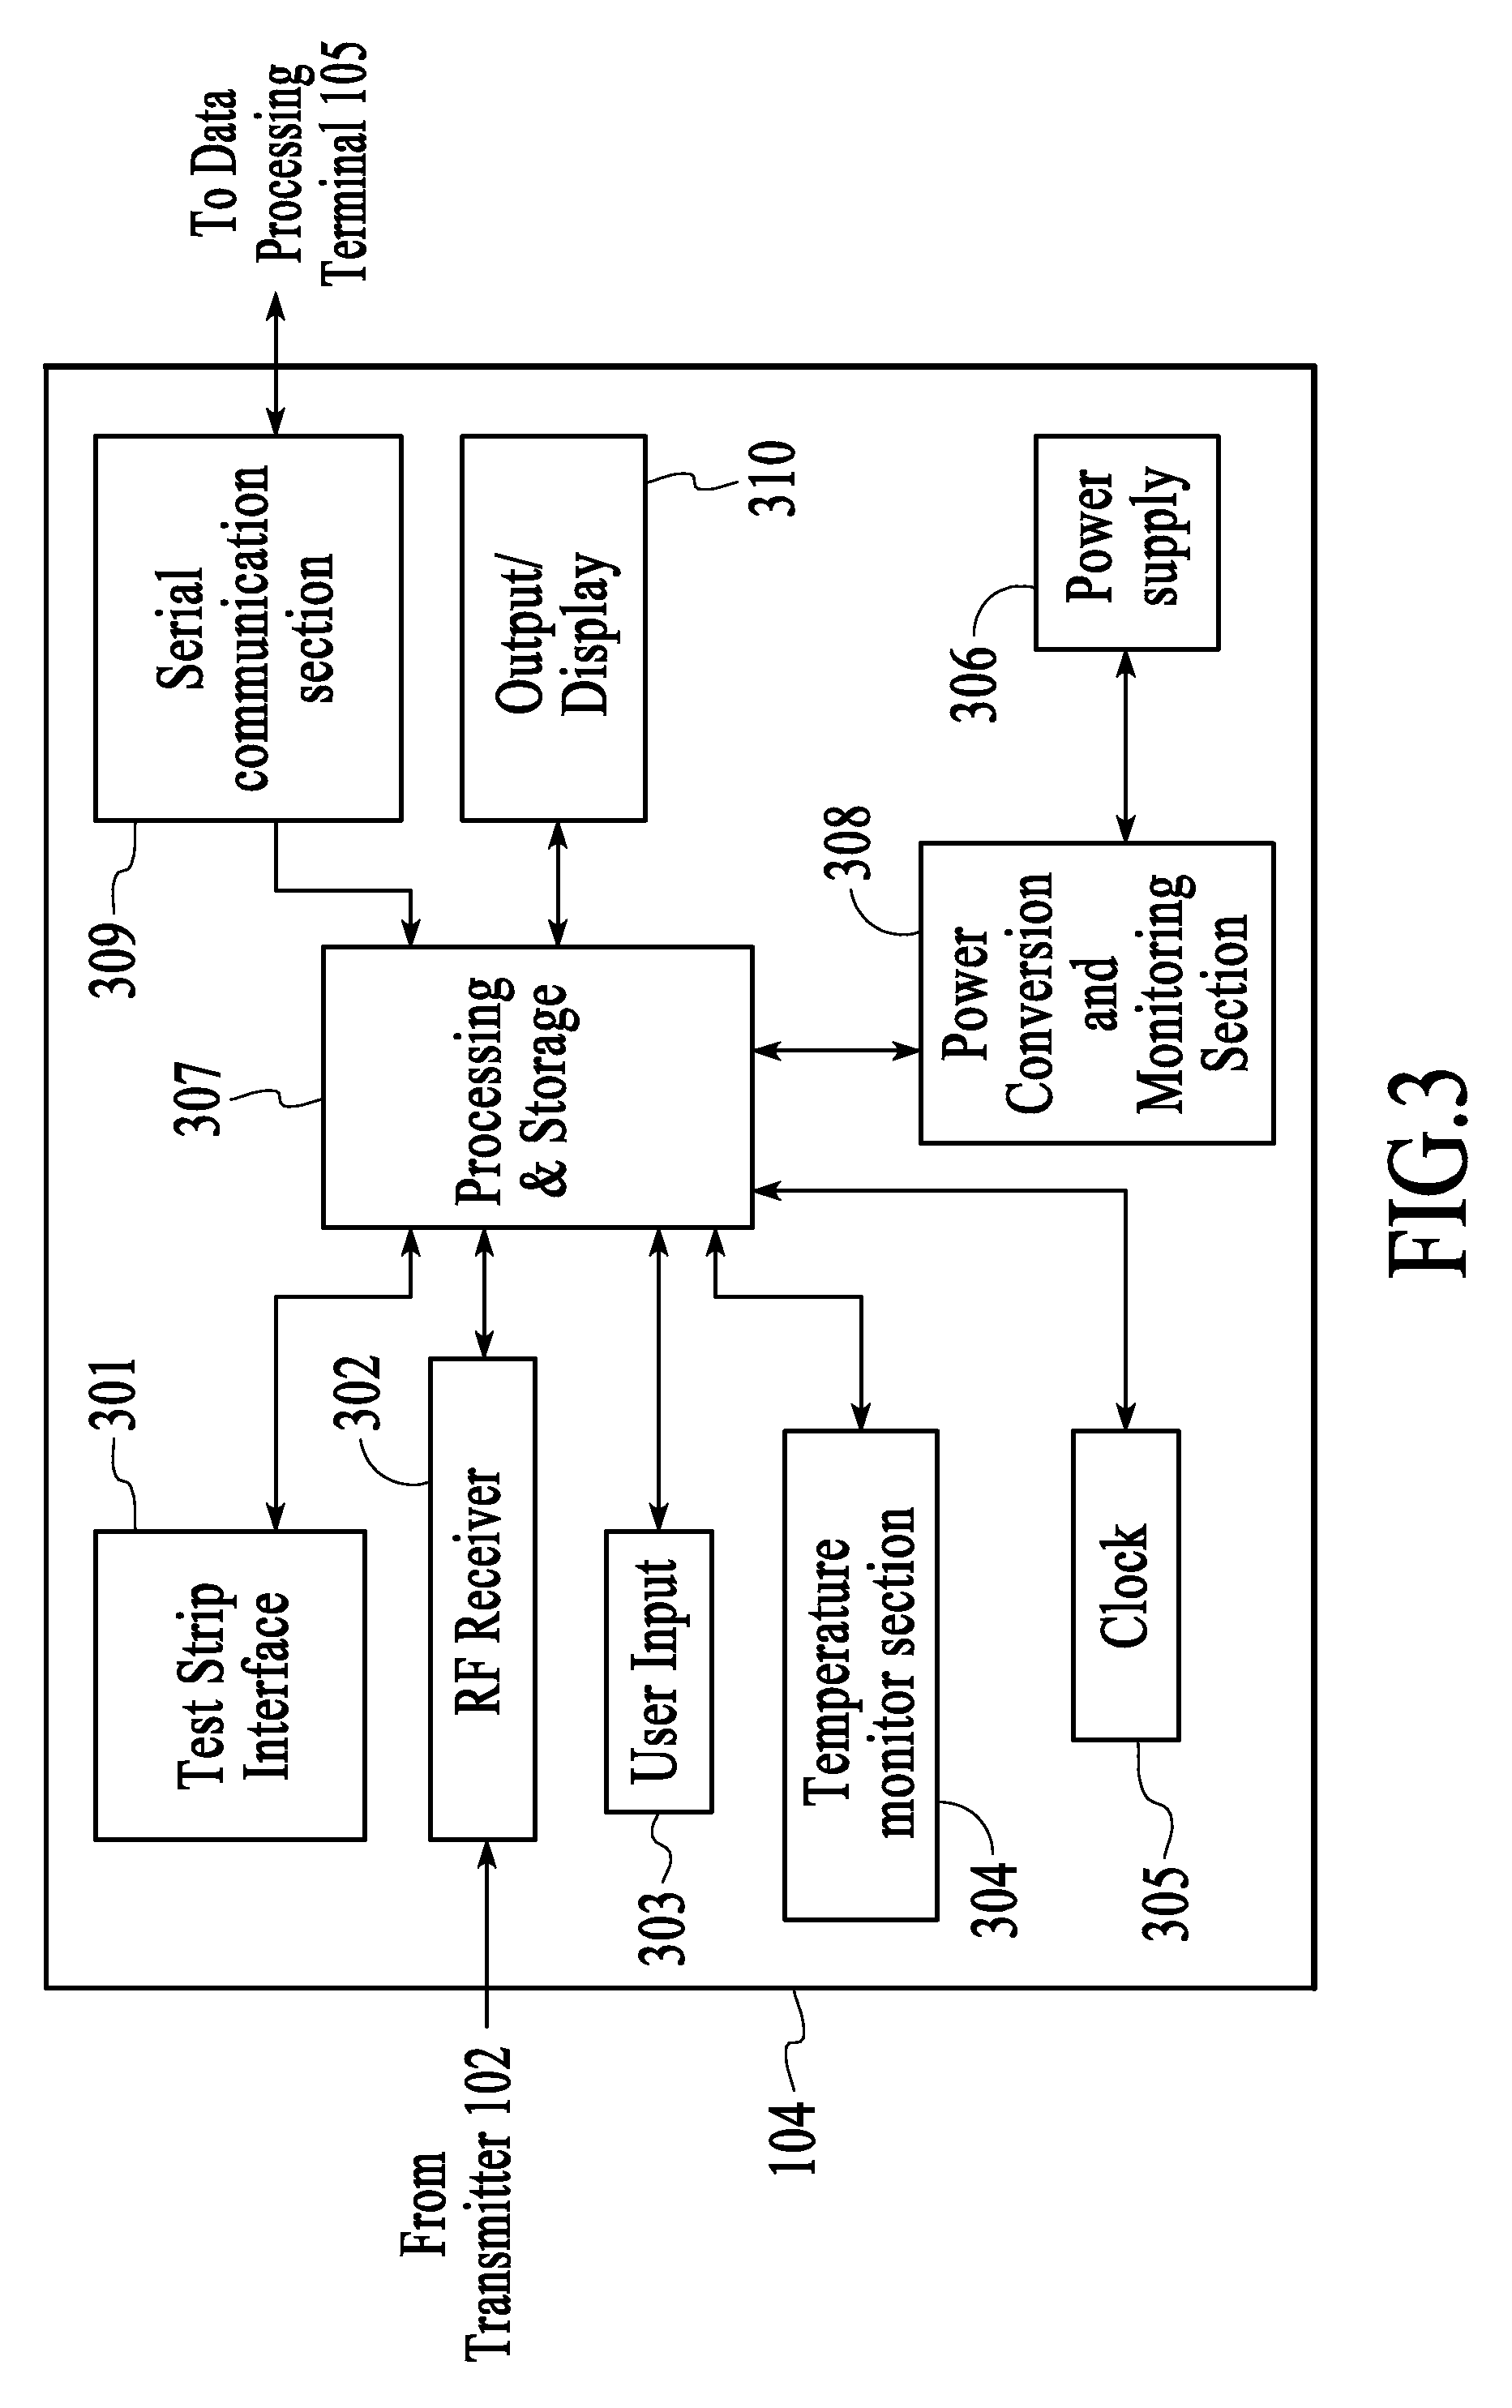 Method and System for Providing Data Transmission in a Data Management System